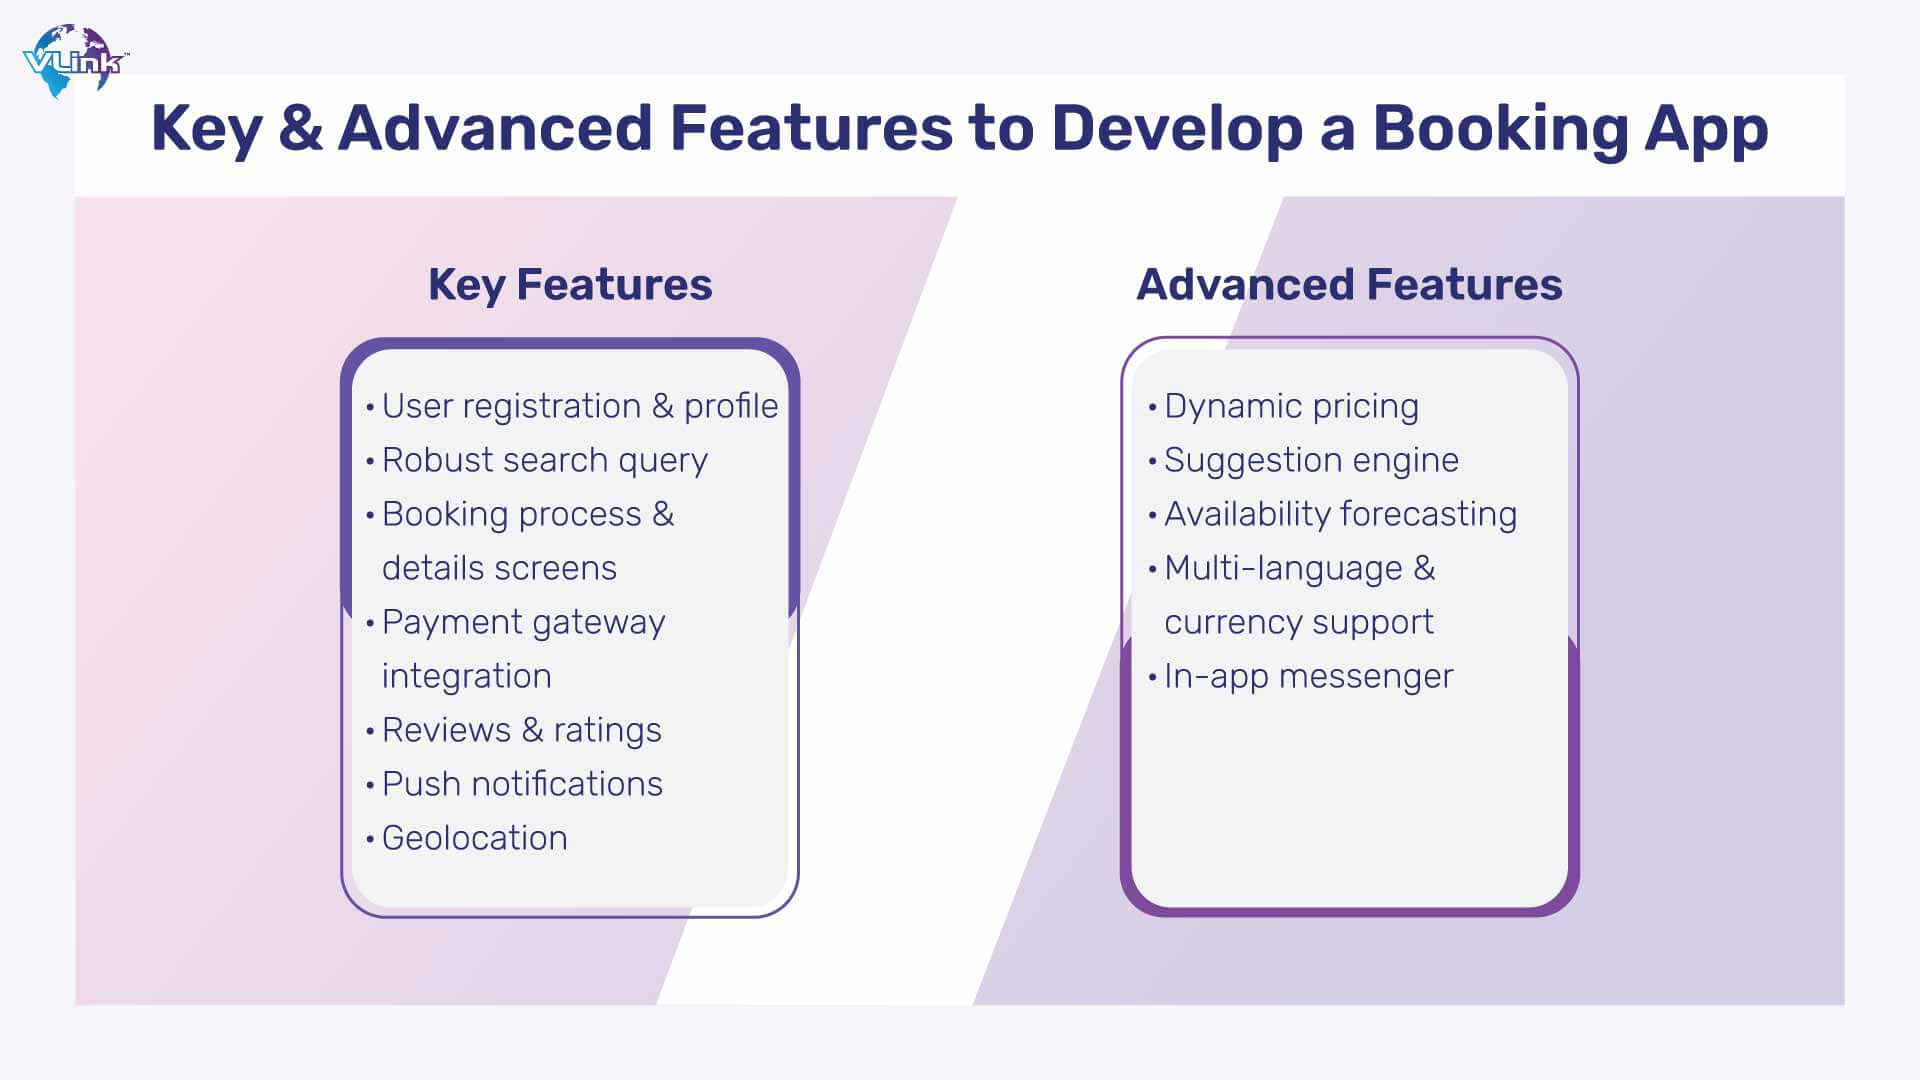 Key & Advanced Features to Develop a Booking App